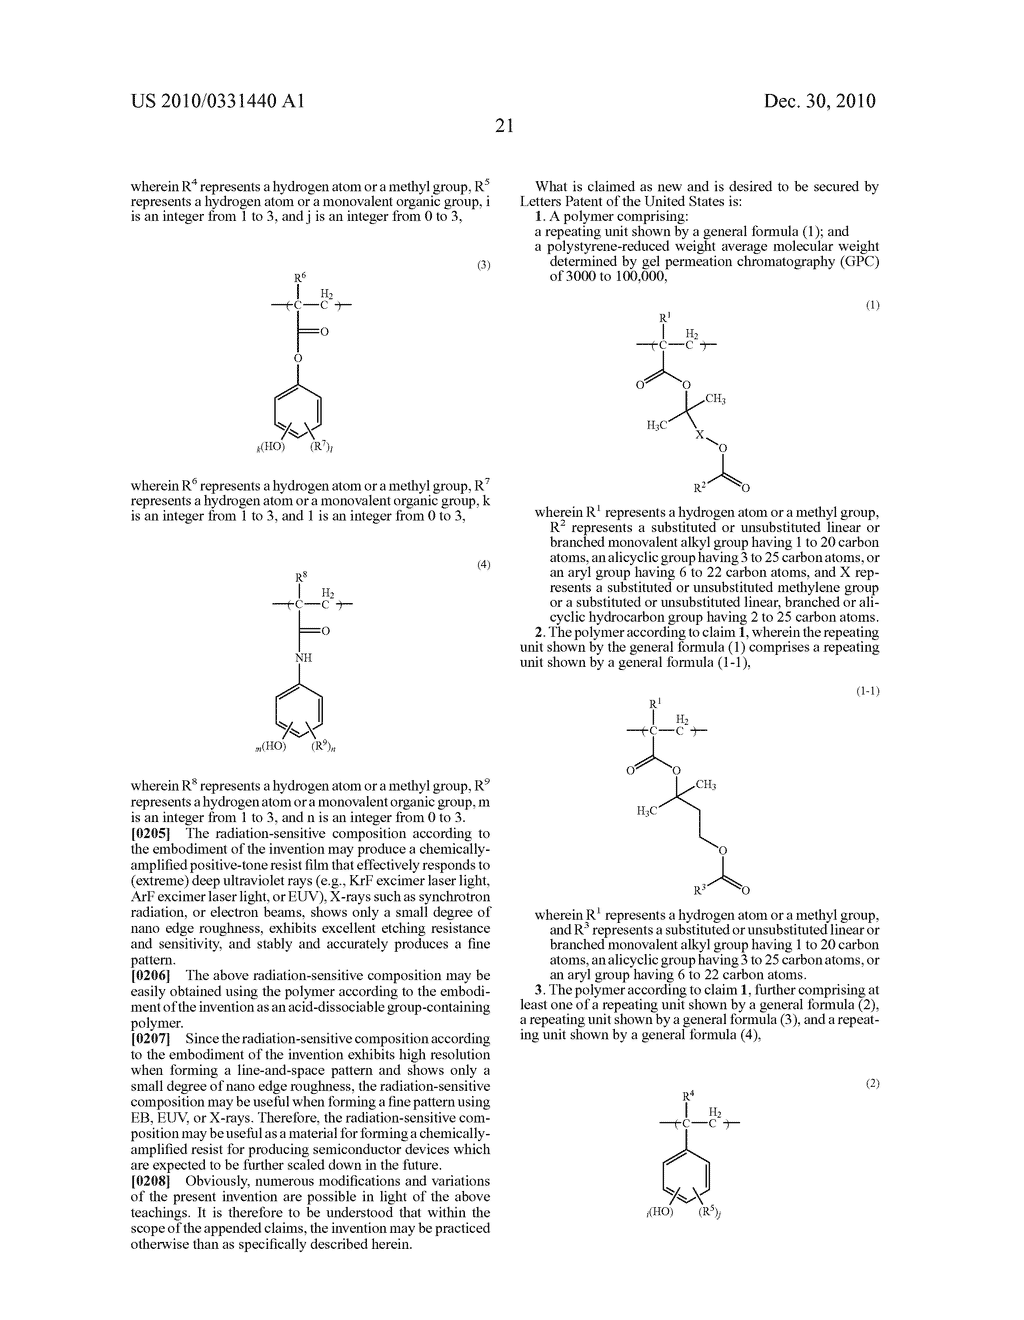 RADIATION-SENSITIVE COMPOSITION, POLYMER AND MONOMER - diagram, schematic, and image 24